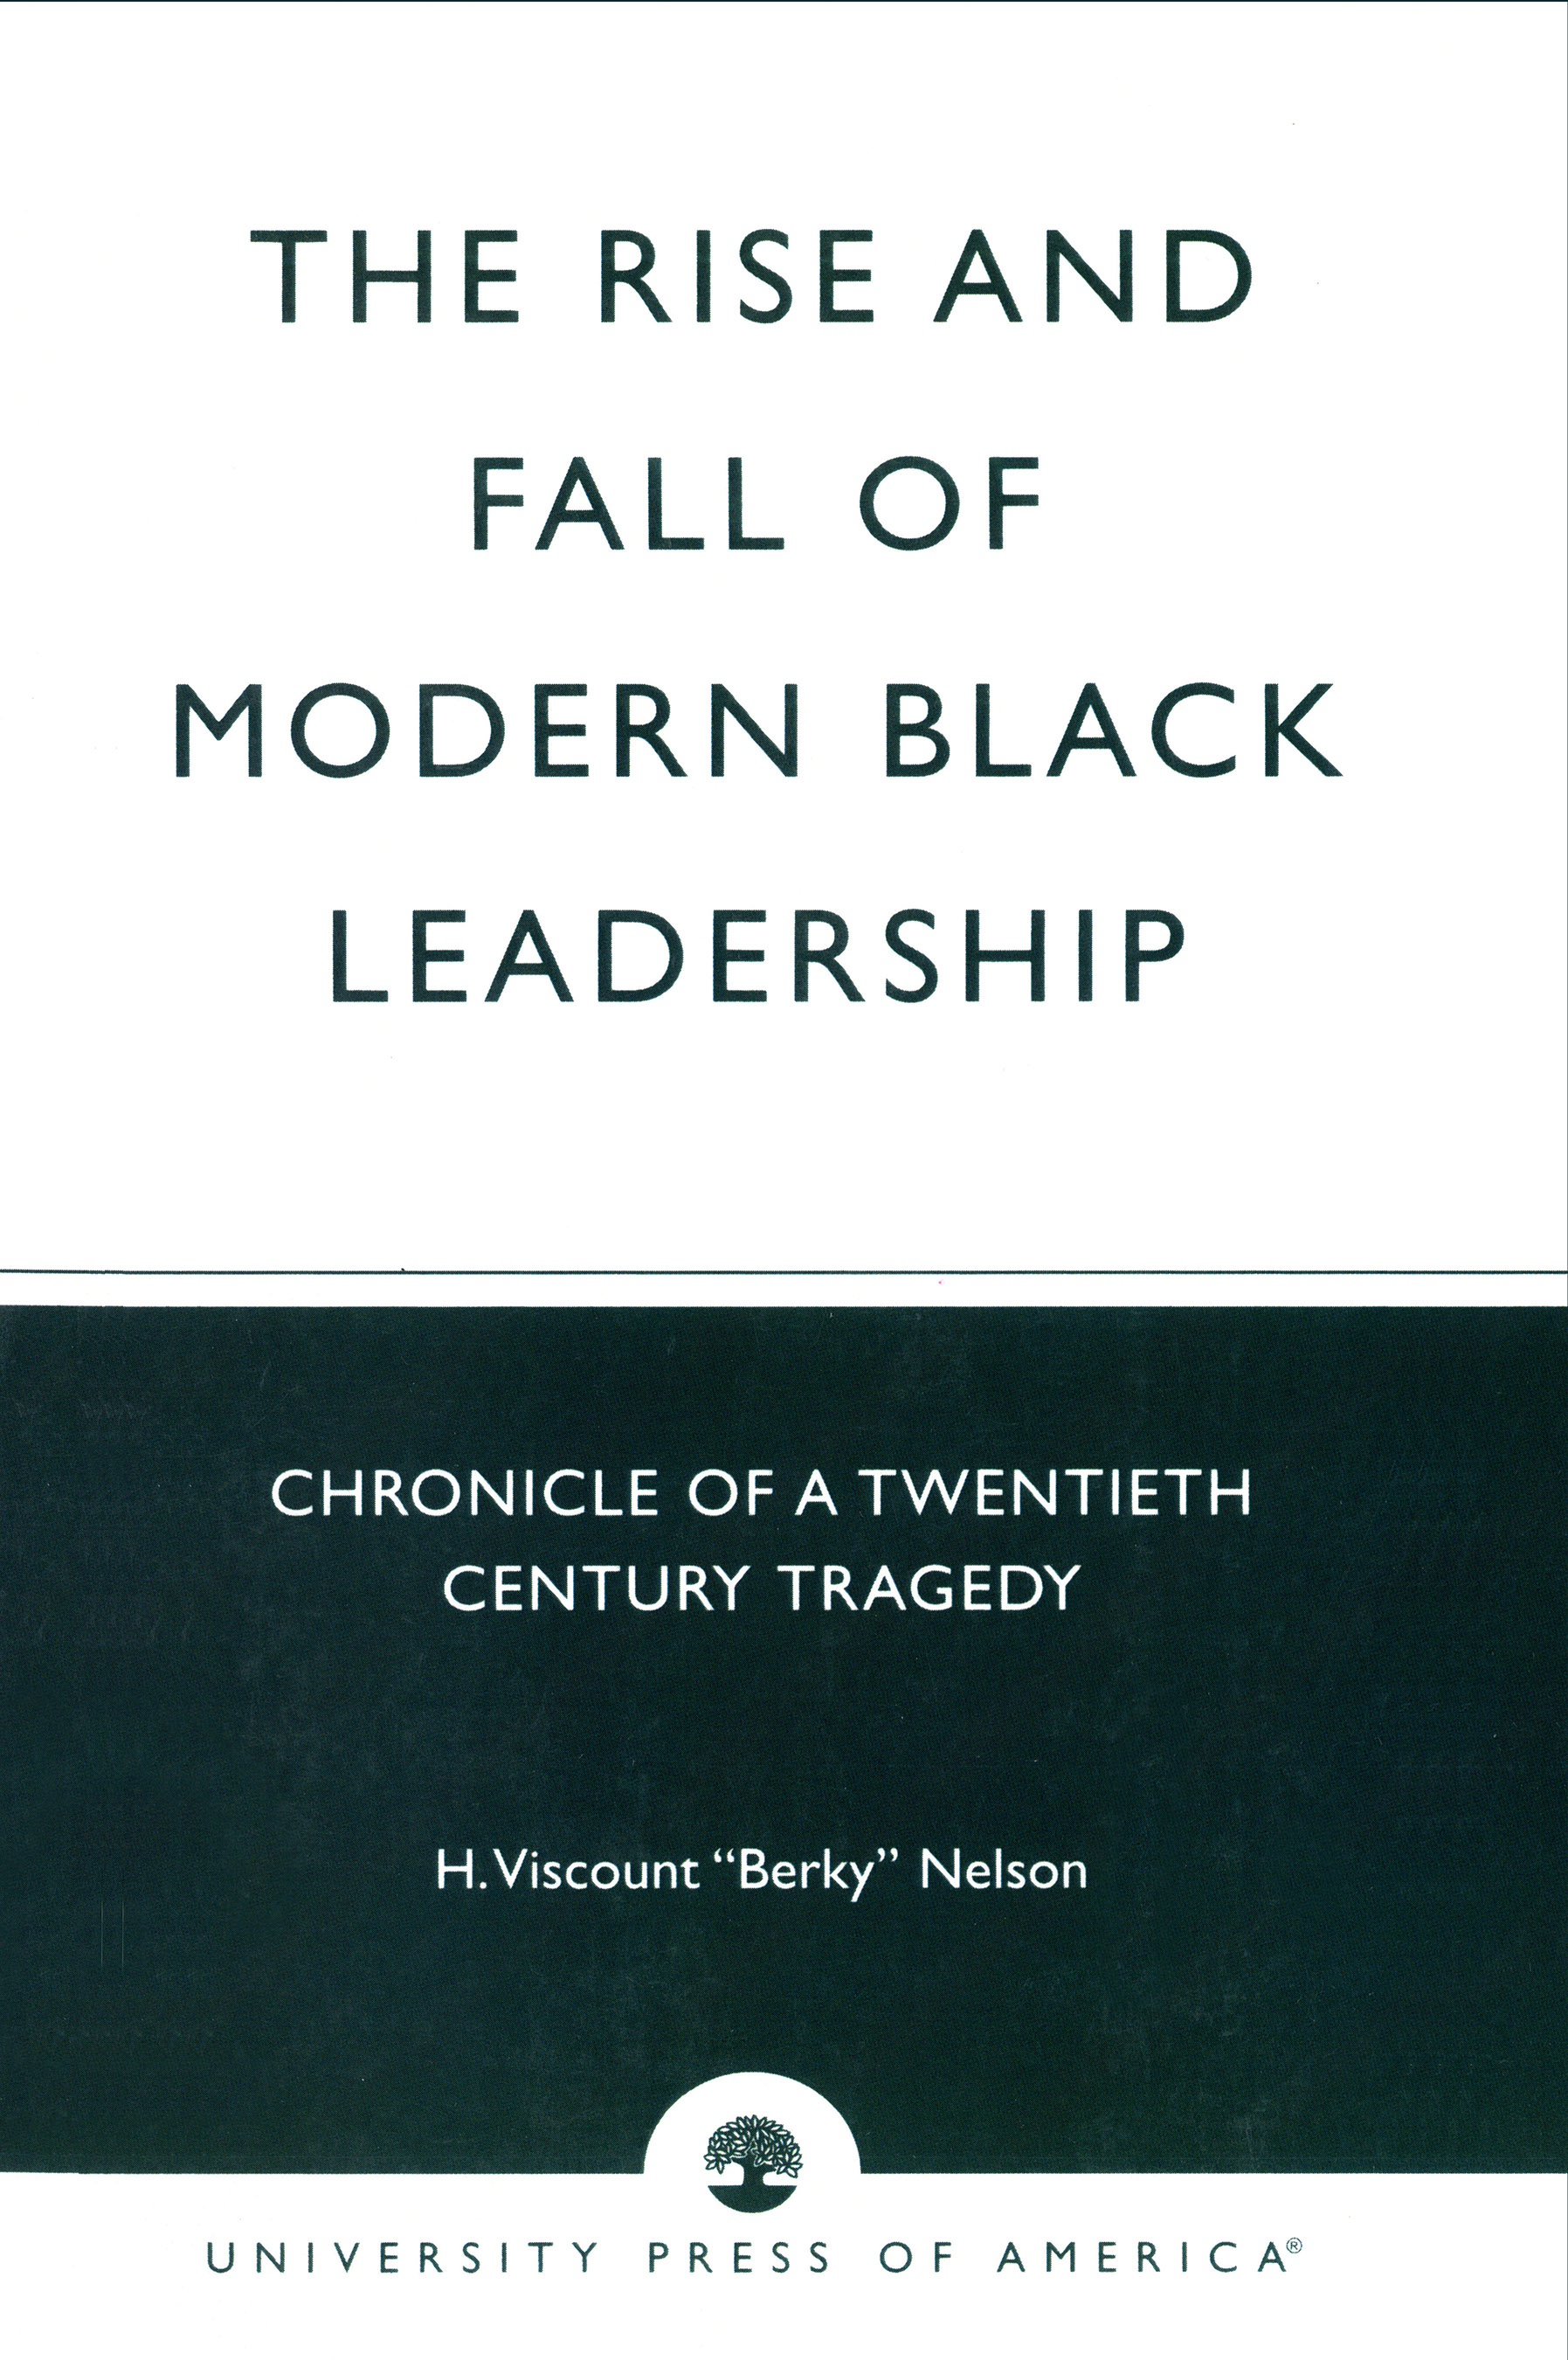 The Rise and Fall of Modern Black Leadership: Chronicle of a Twentieth Century Tragedy